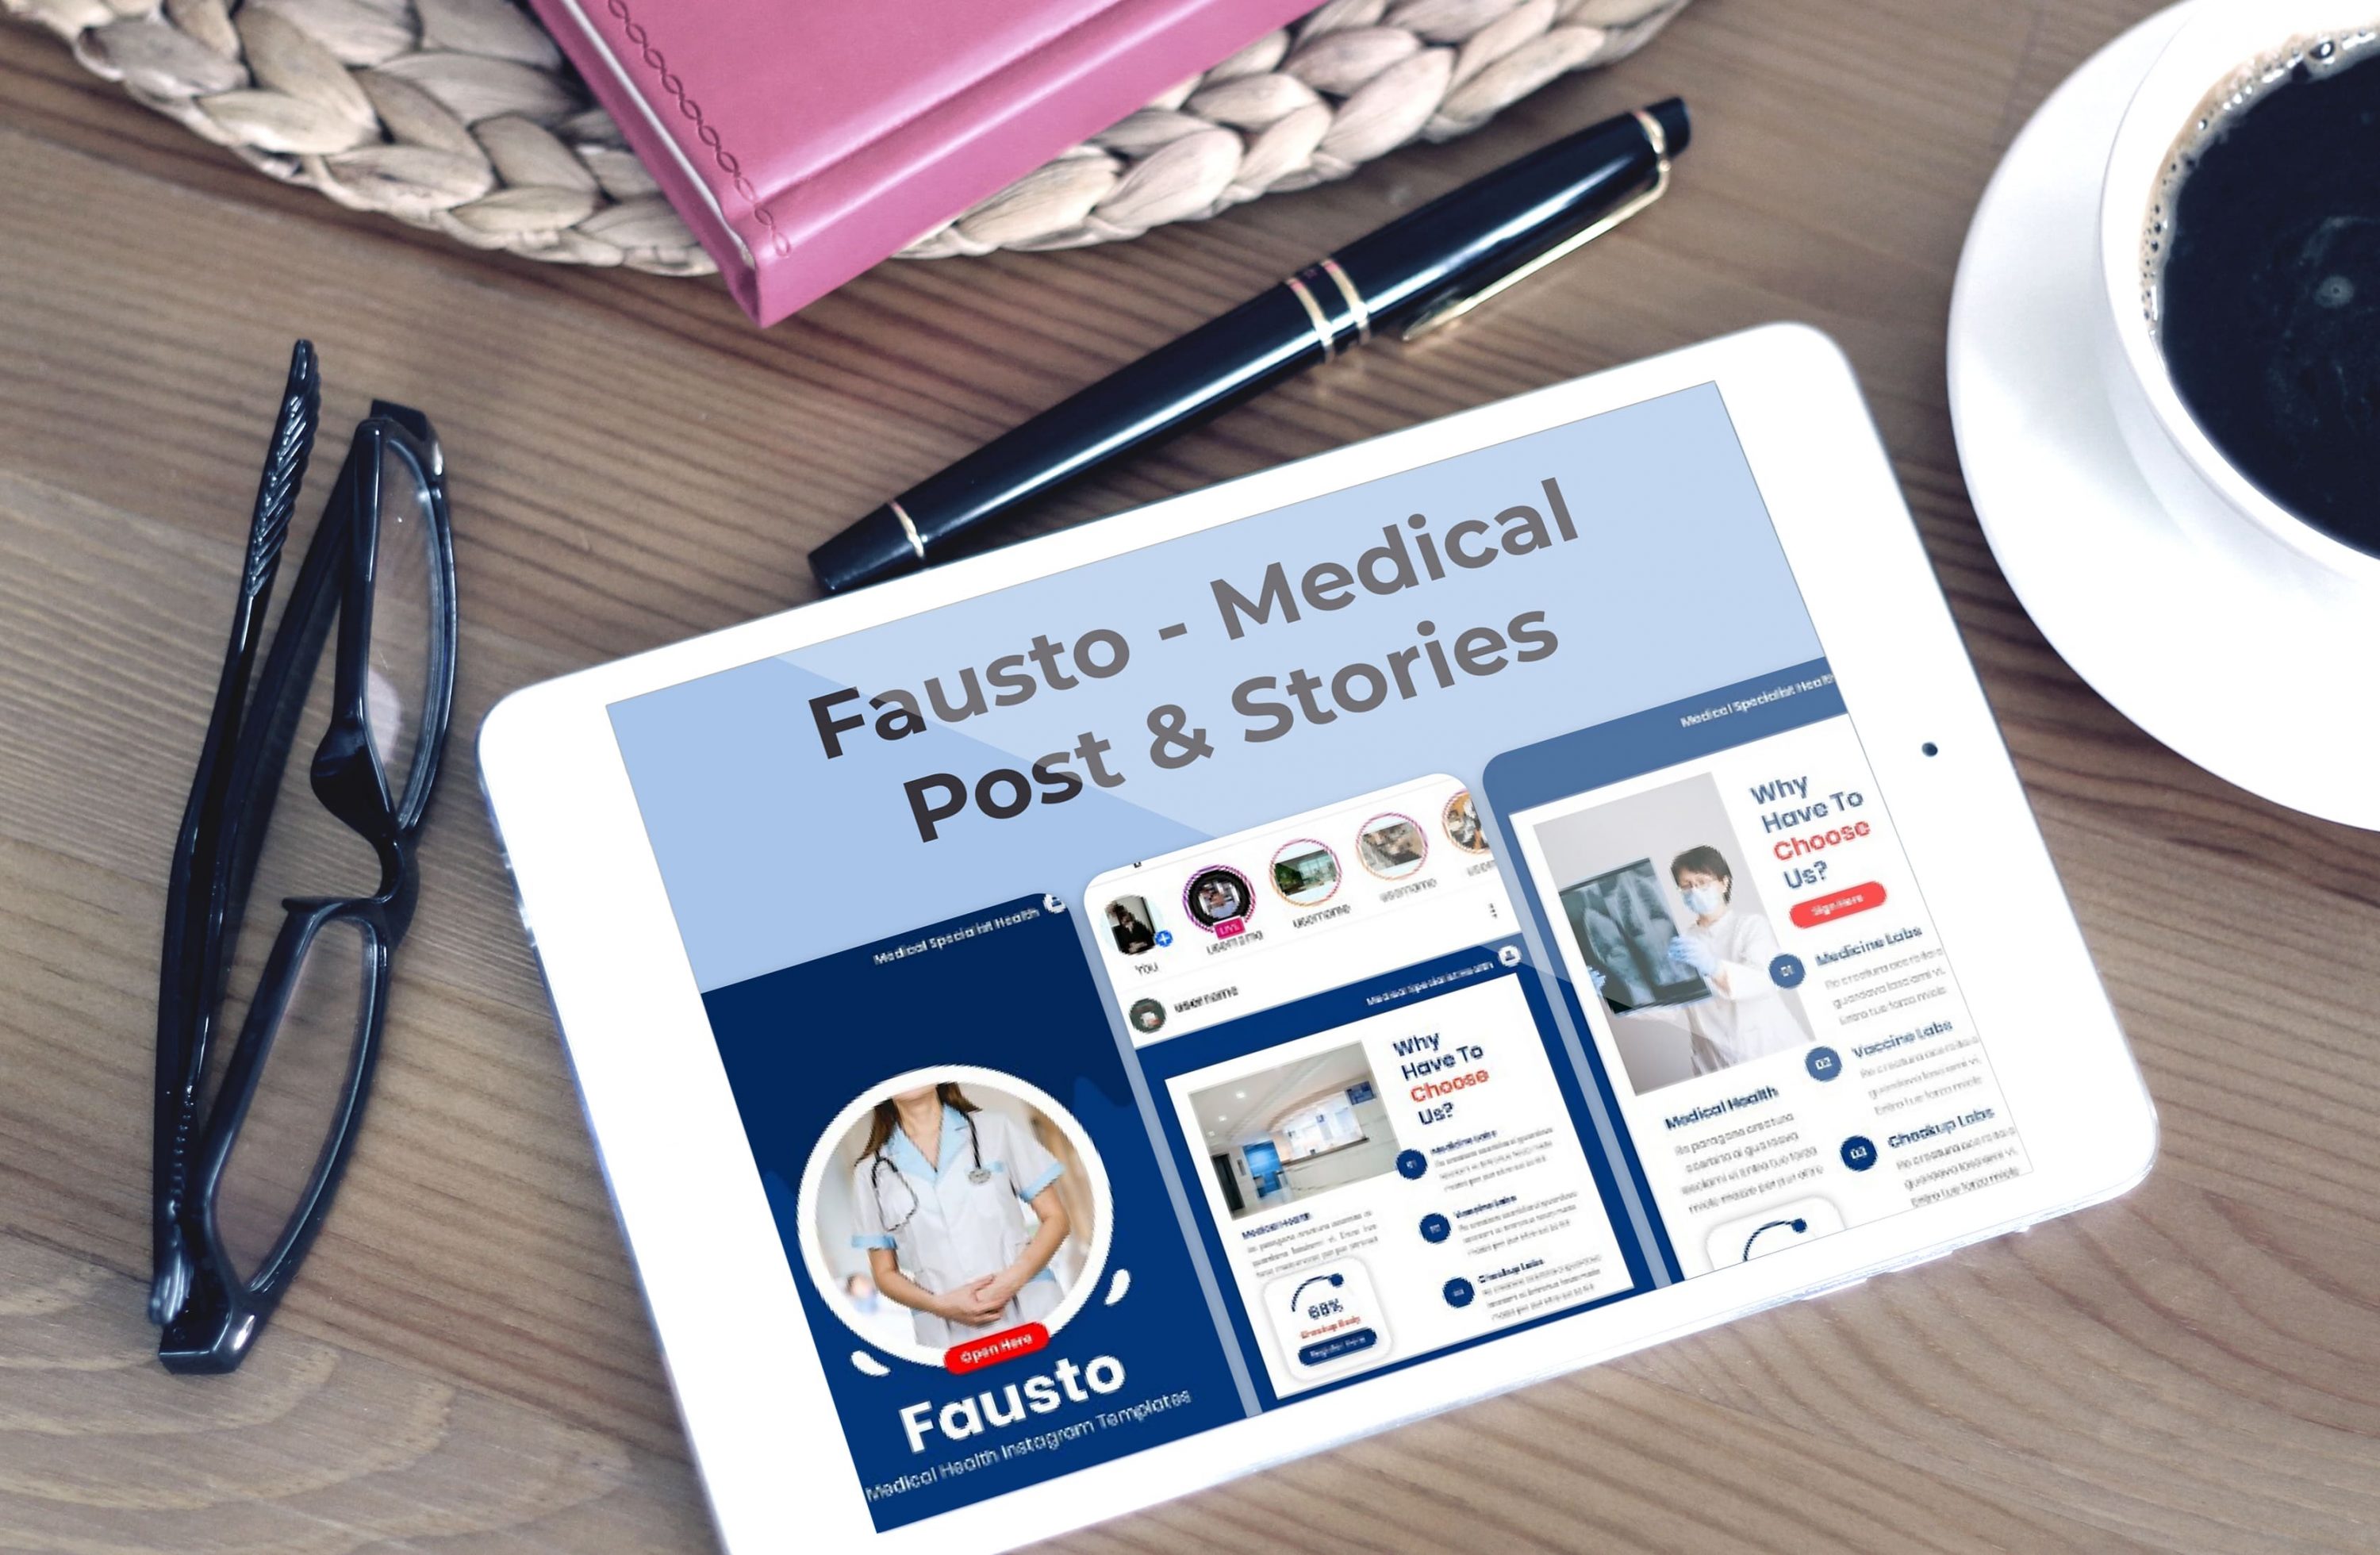 Tablet option of the Fausto - Medical Post & Stories.